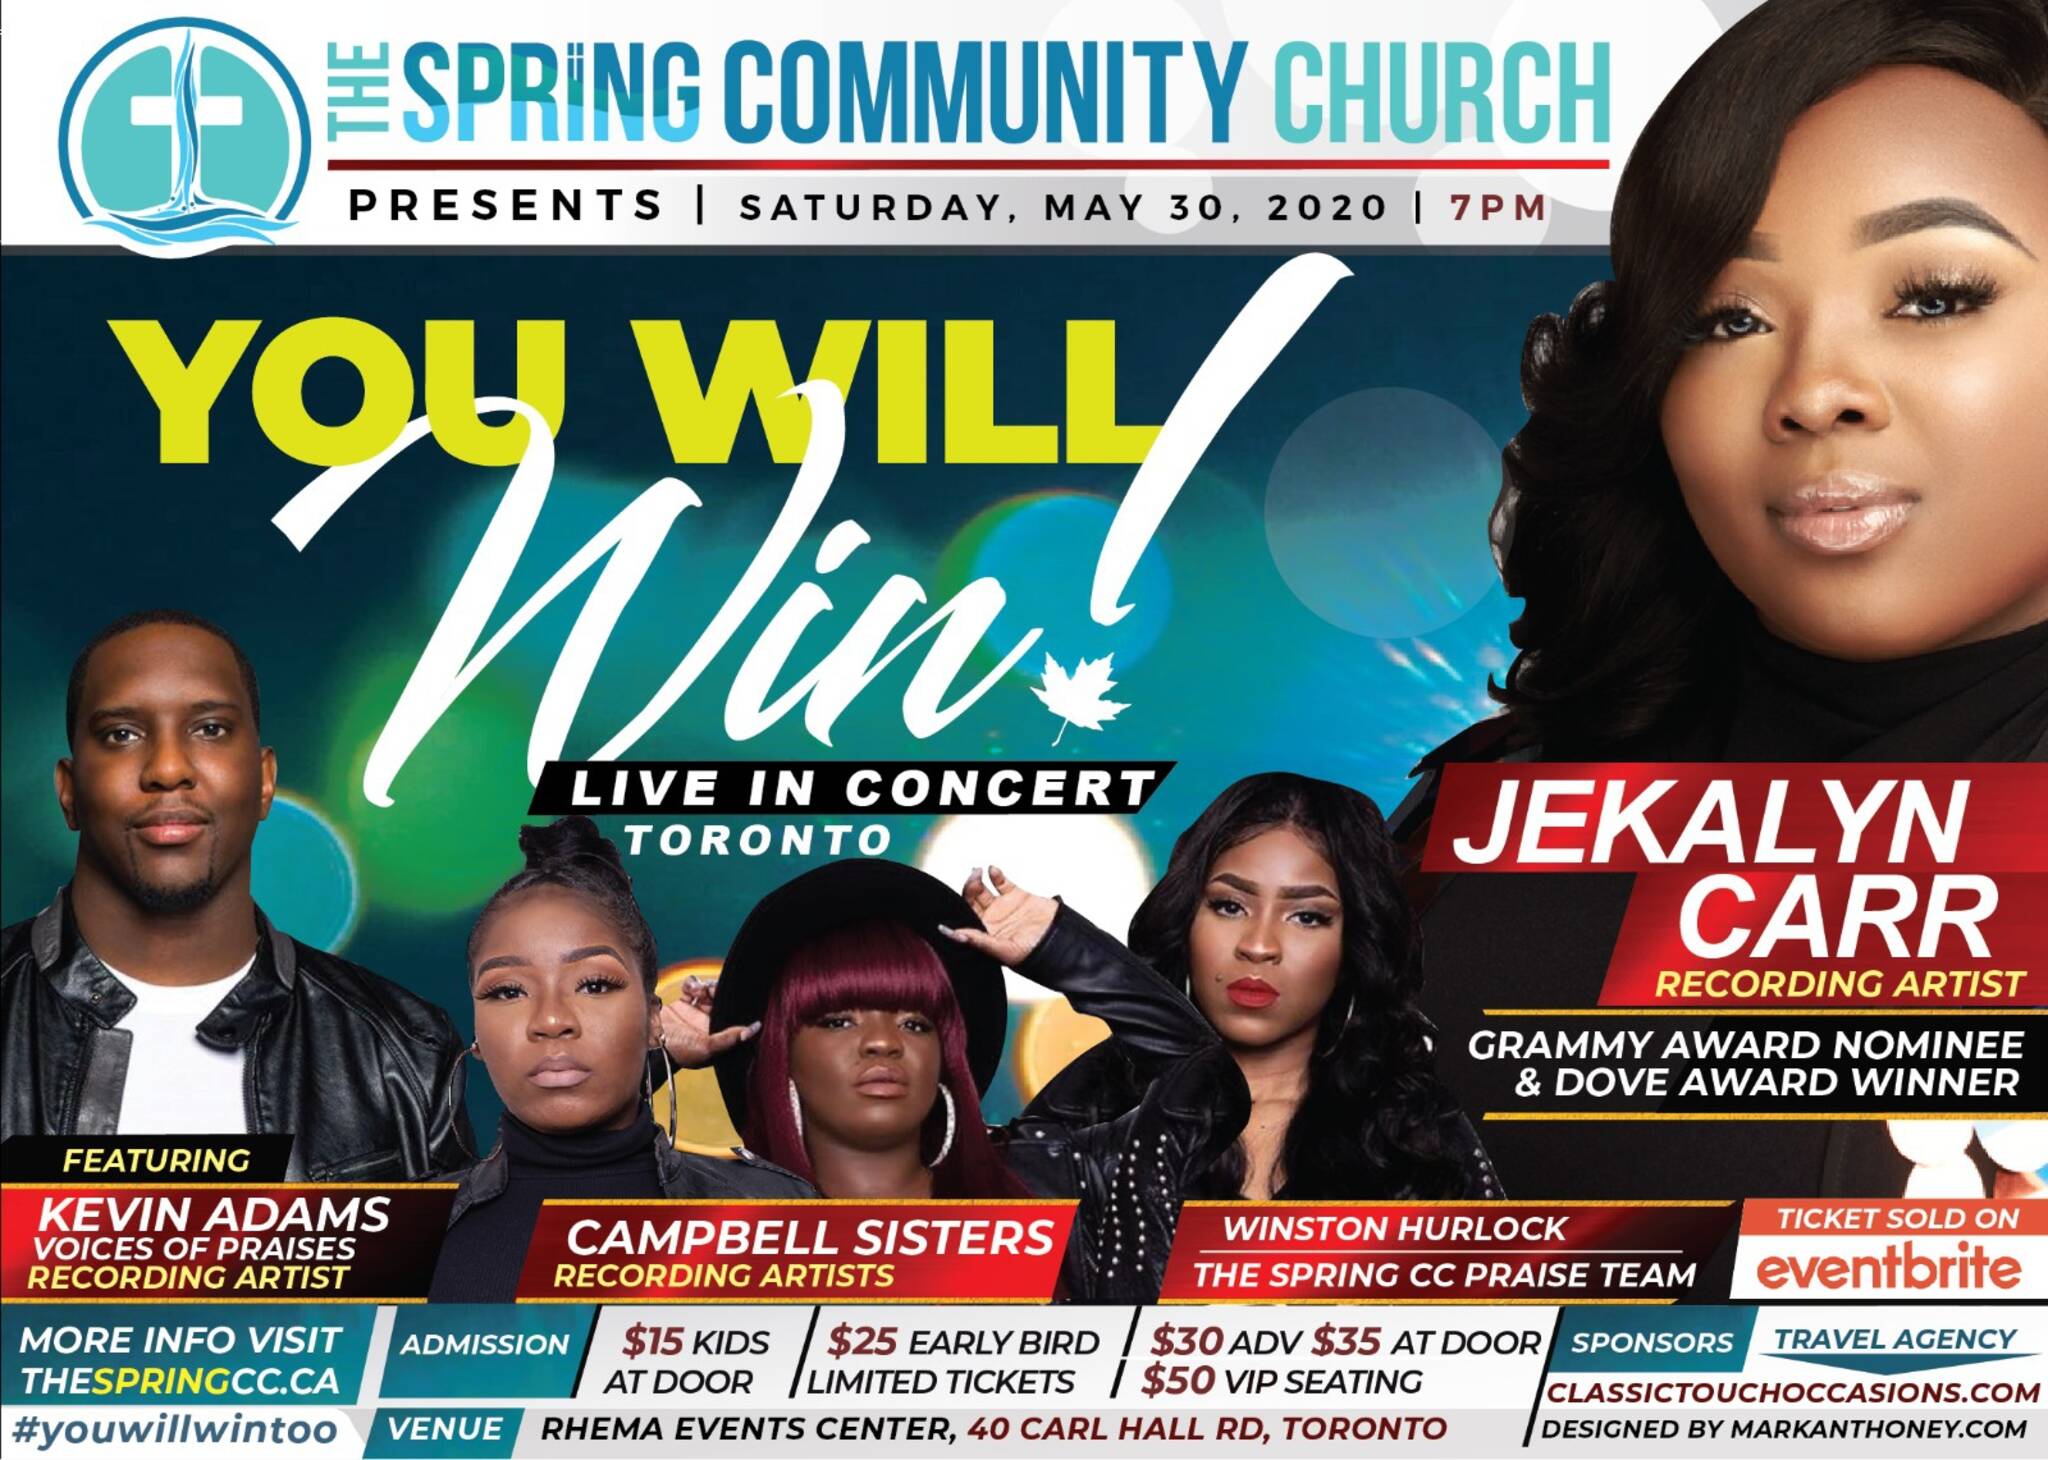 The Spring Community Church presents "You Will Win" featuring Jekalyn